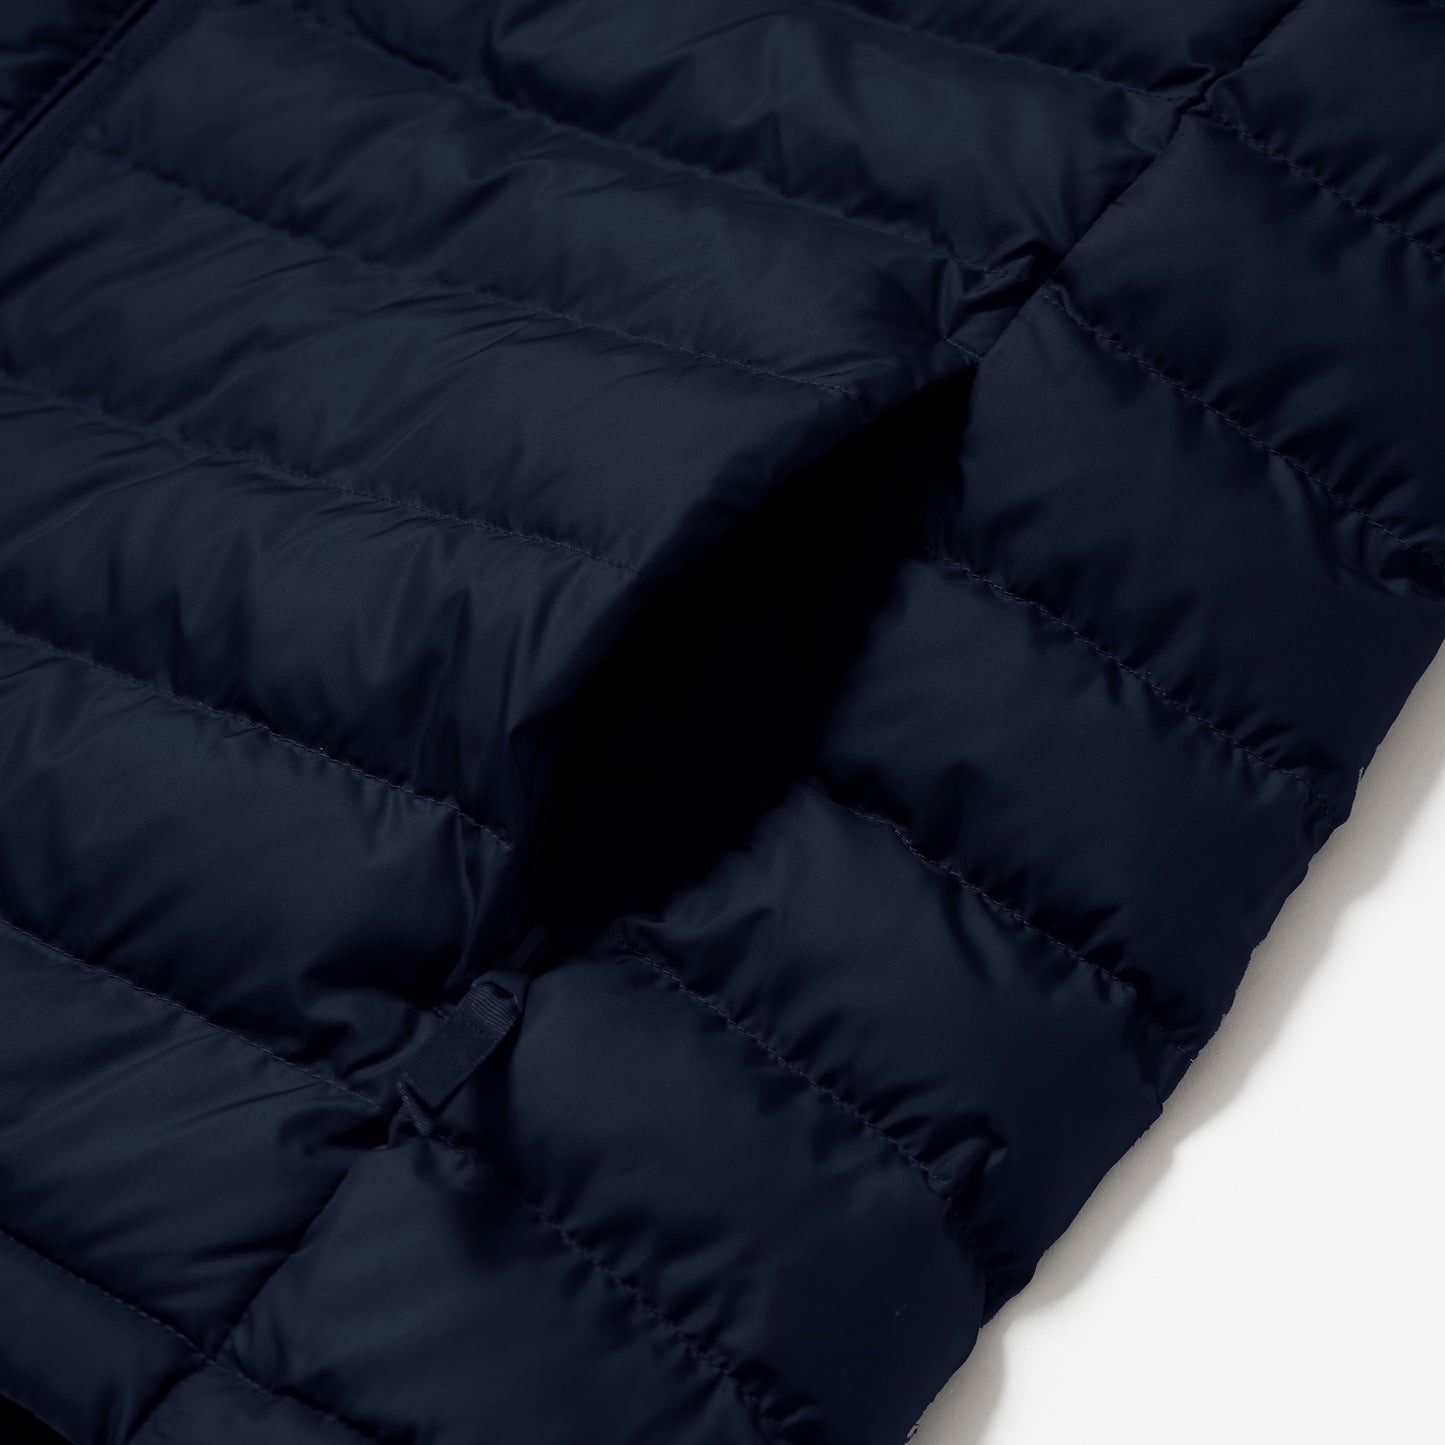 FORTY Kelso Gilet (Navy) xccscss.